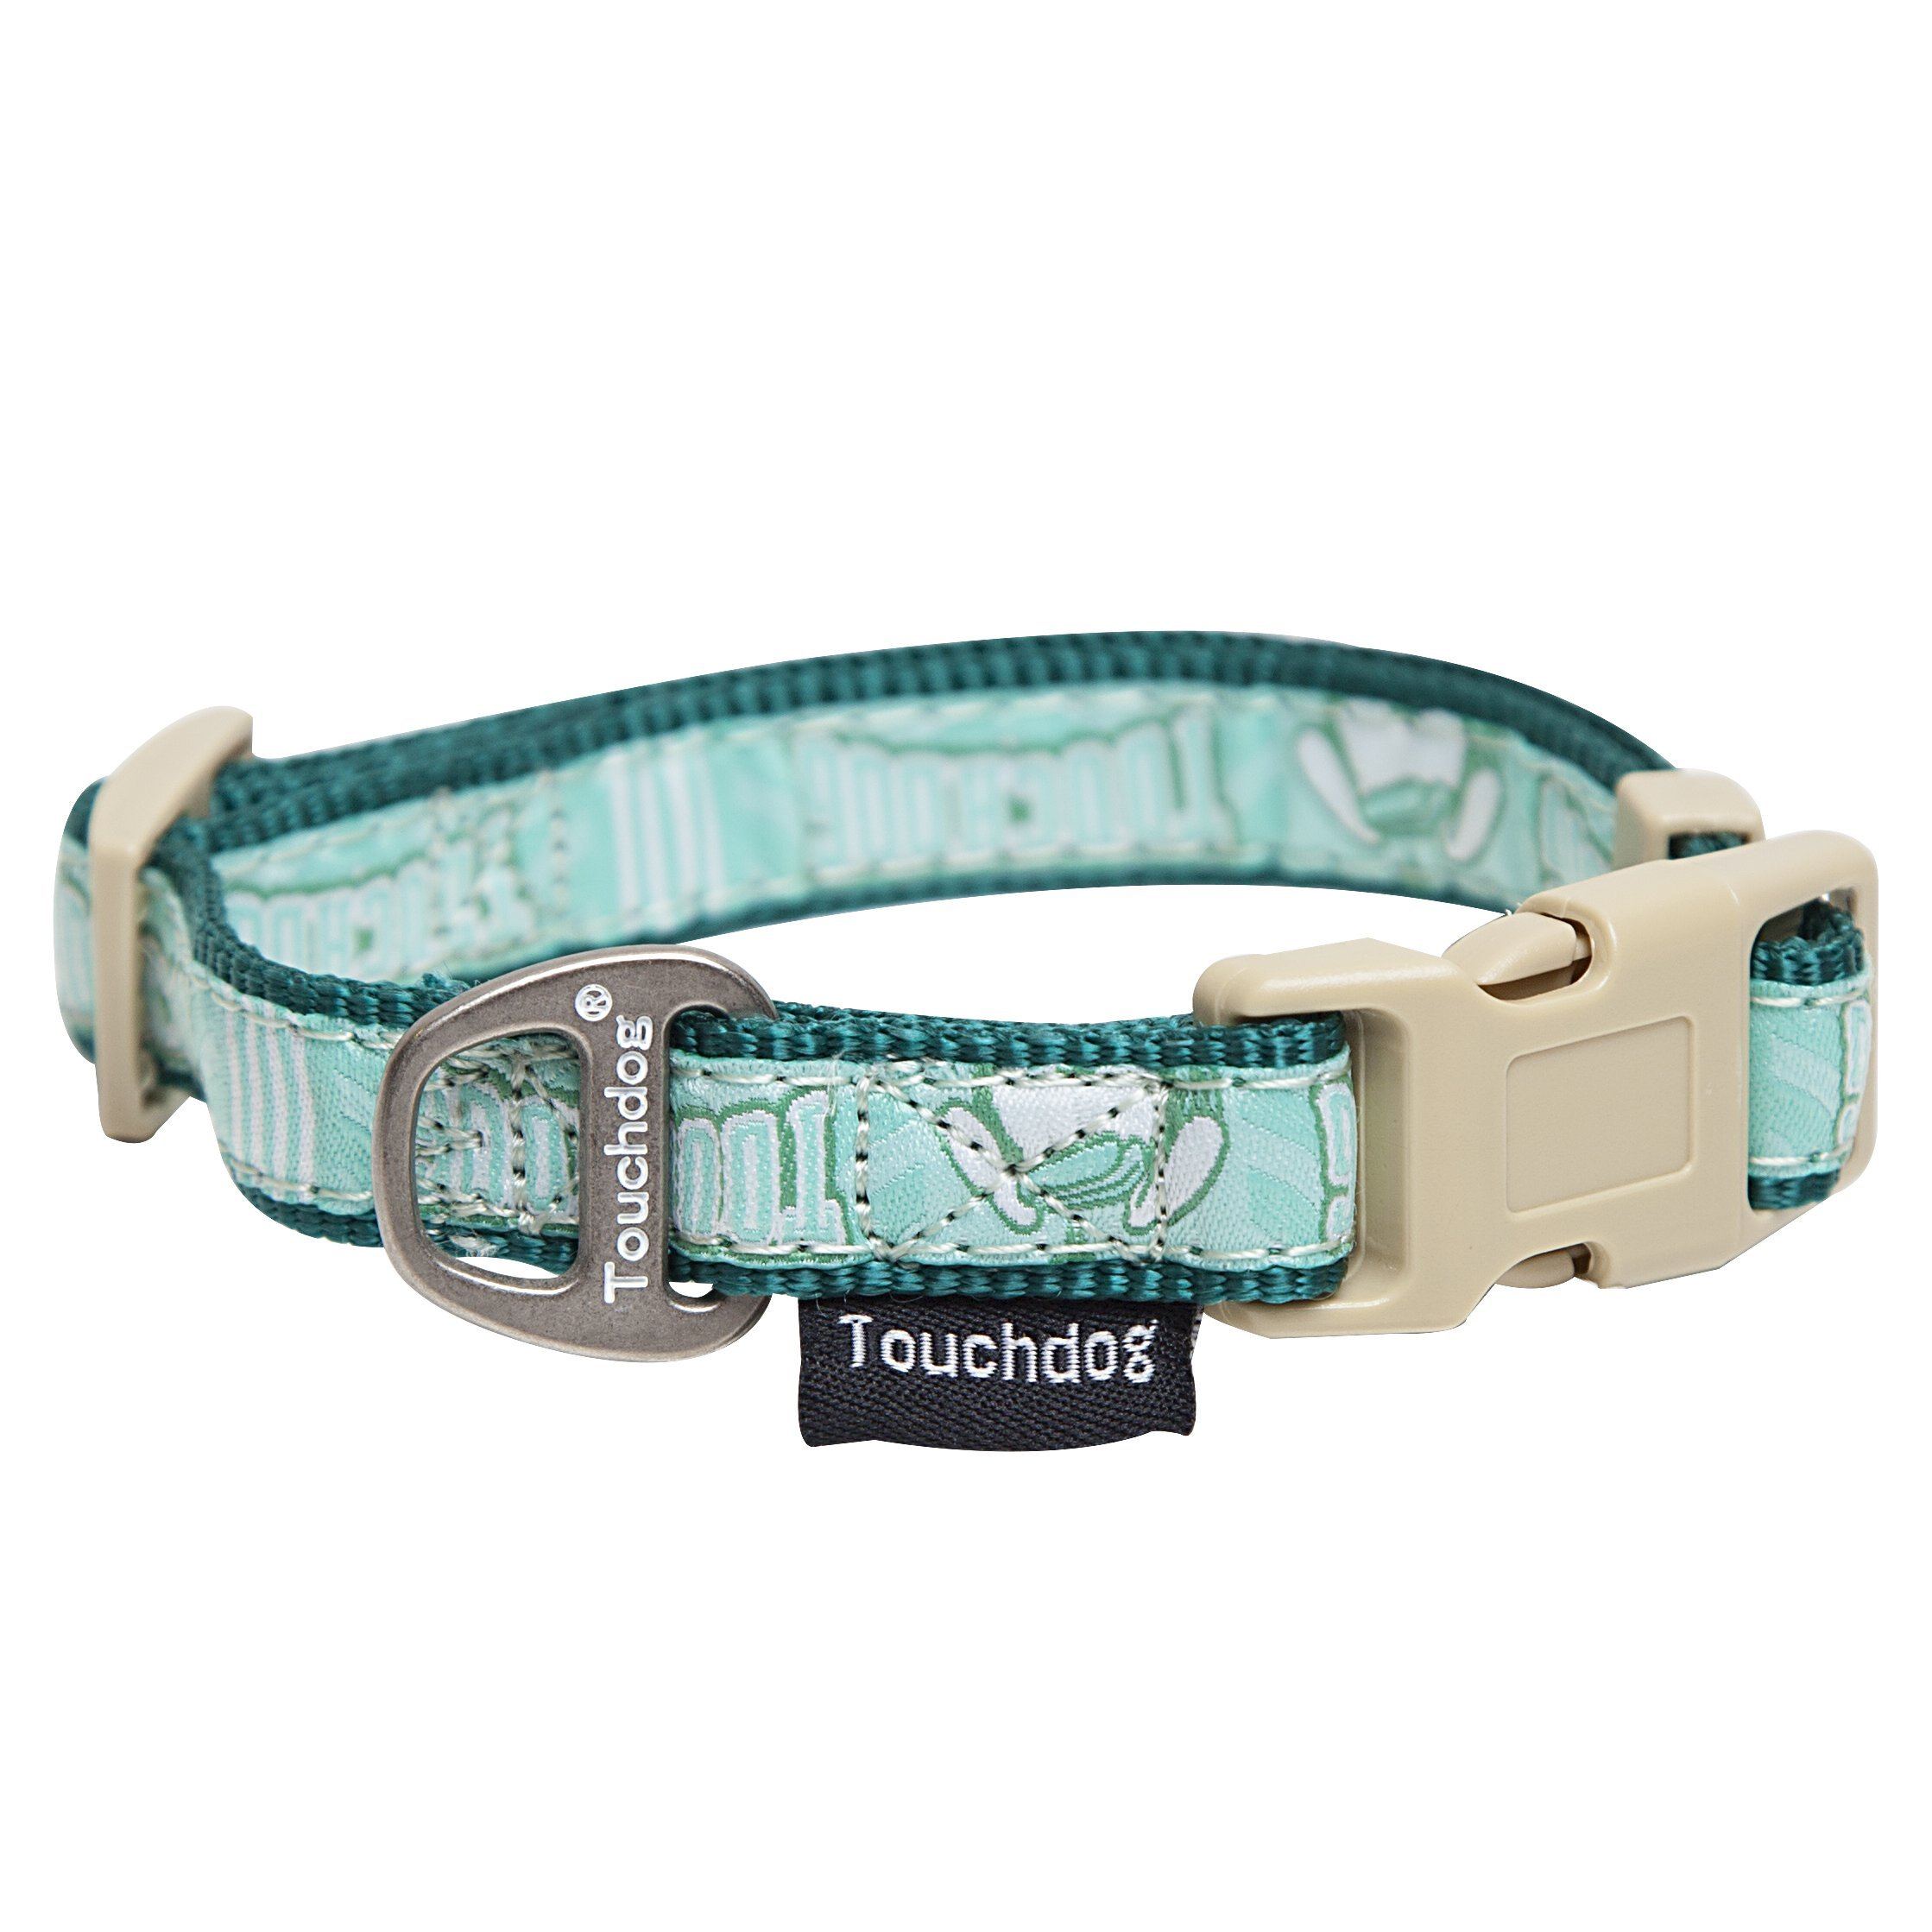 Touchdog 'Funny Bun' Tough Stitched Embroidered Collar and Leash  